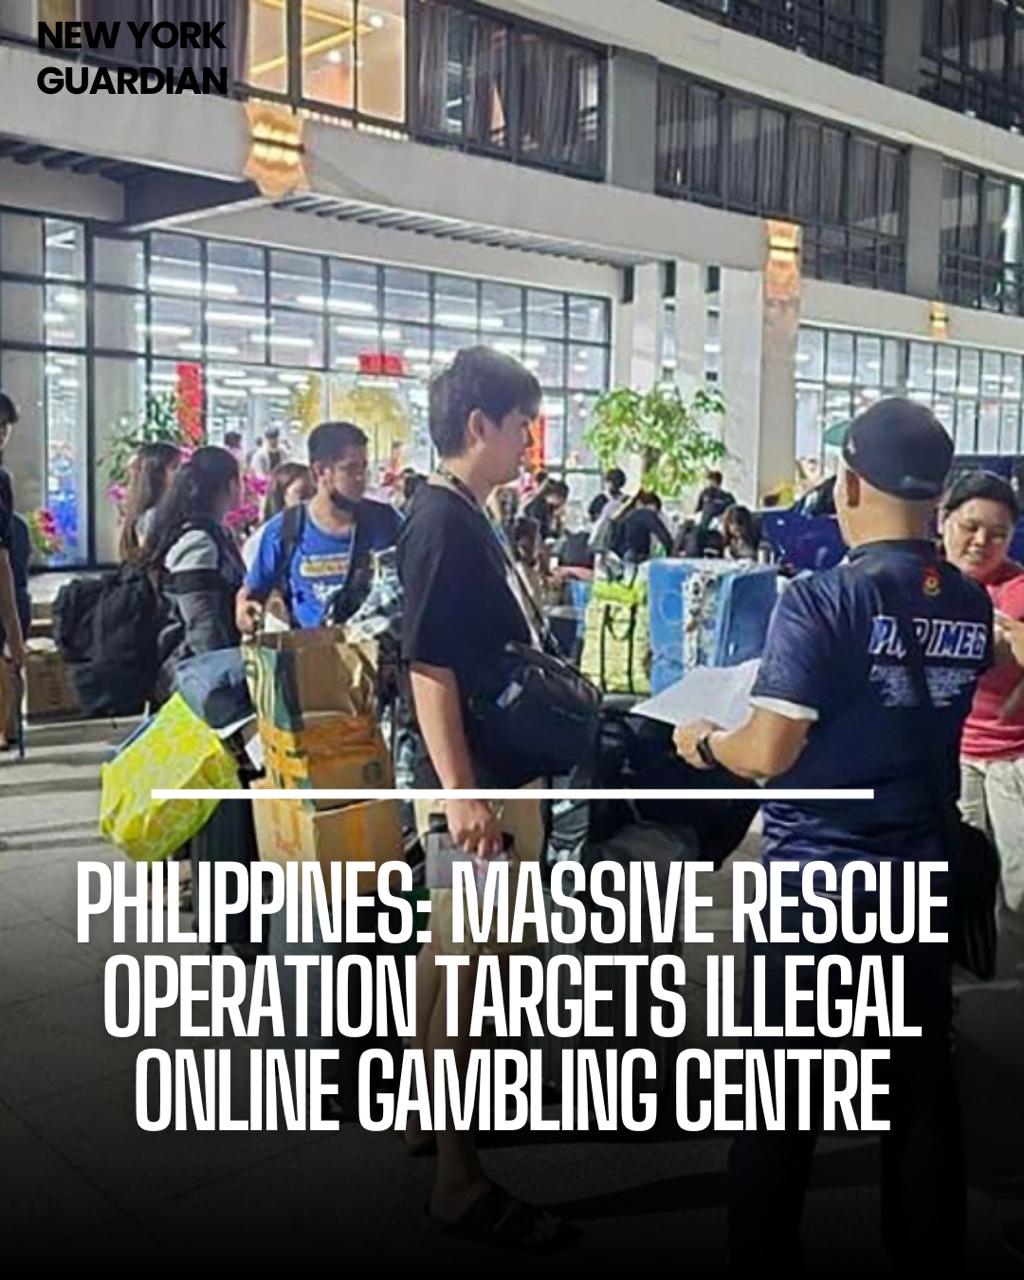 Many people have been saved from a scam center in the Philippines that made them pose as lovers online.